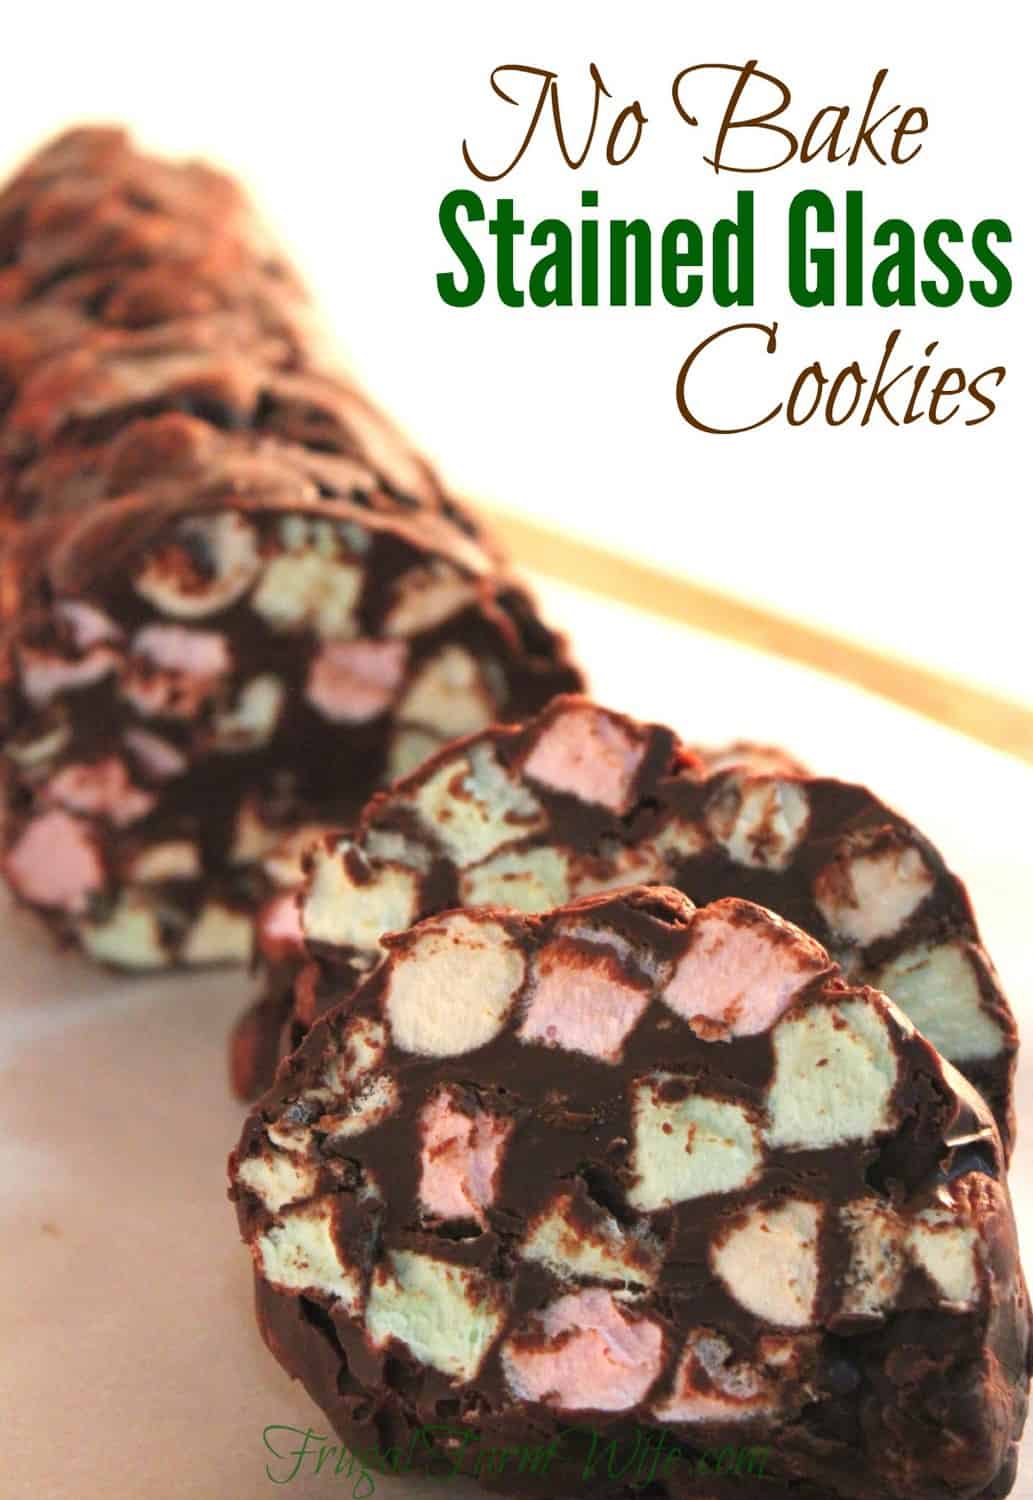 I modified this recipe for stained glass cookies to be no bake so you can have all the deliciousness with none of the hassle!